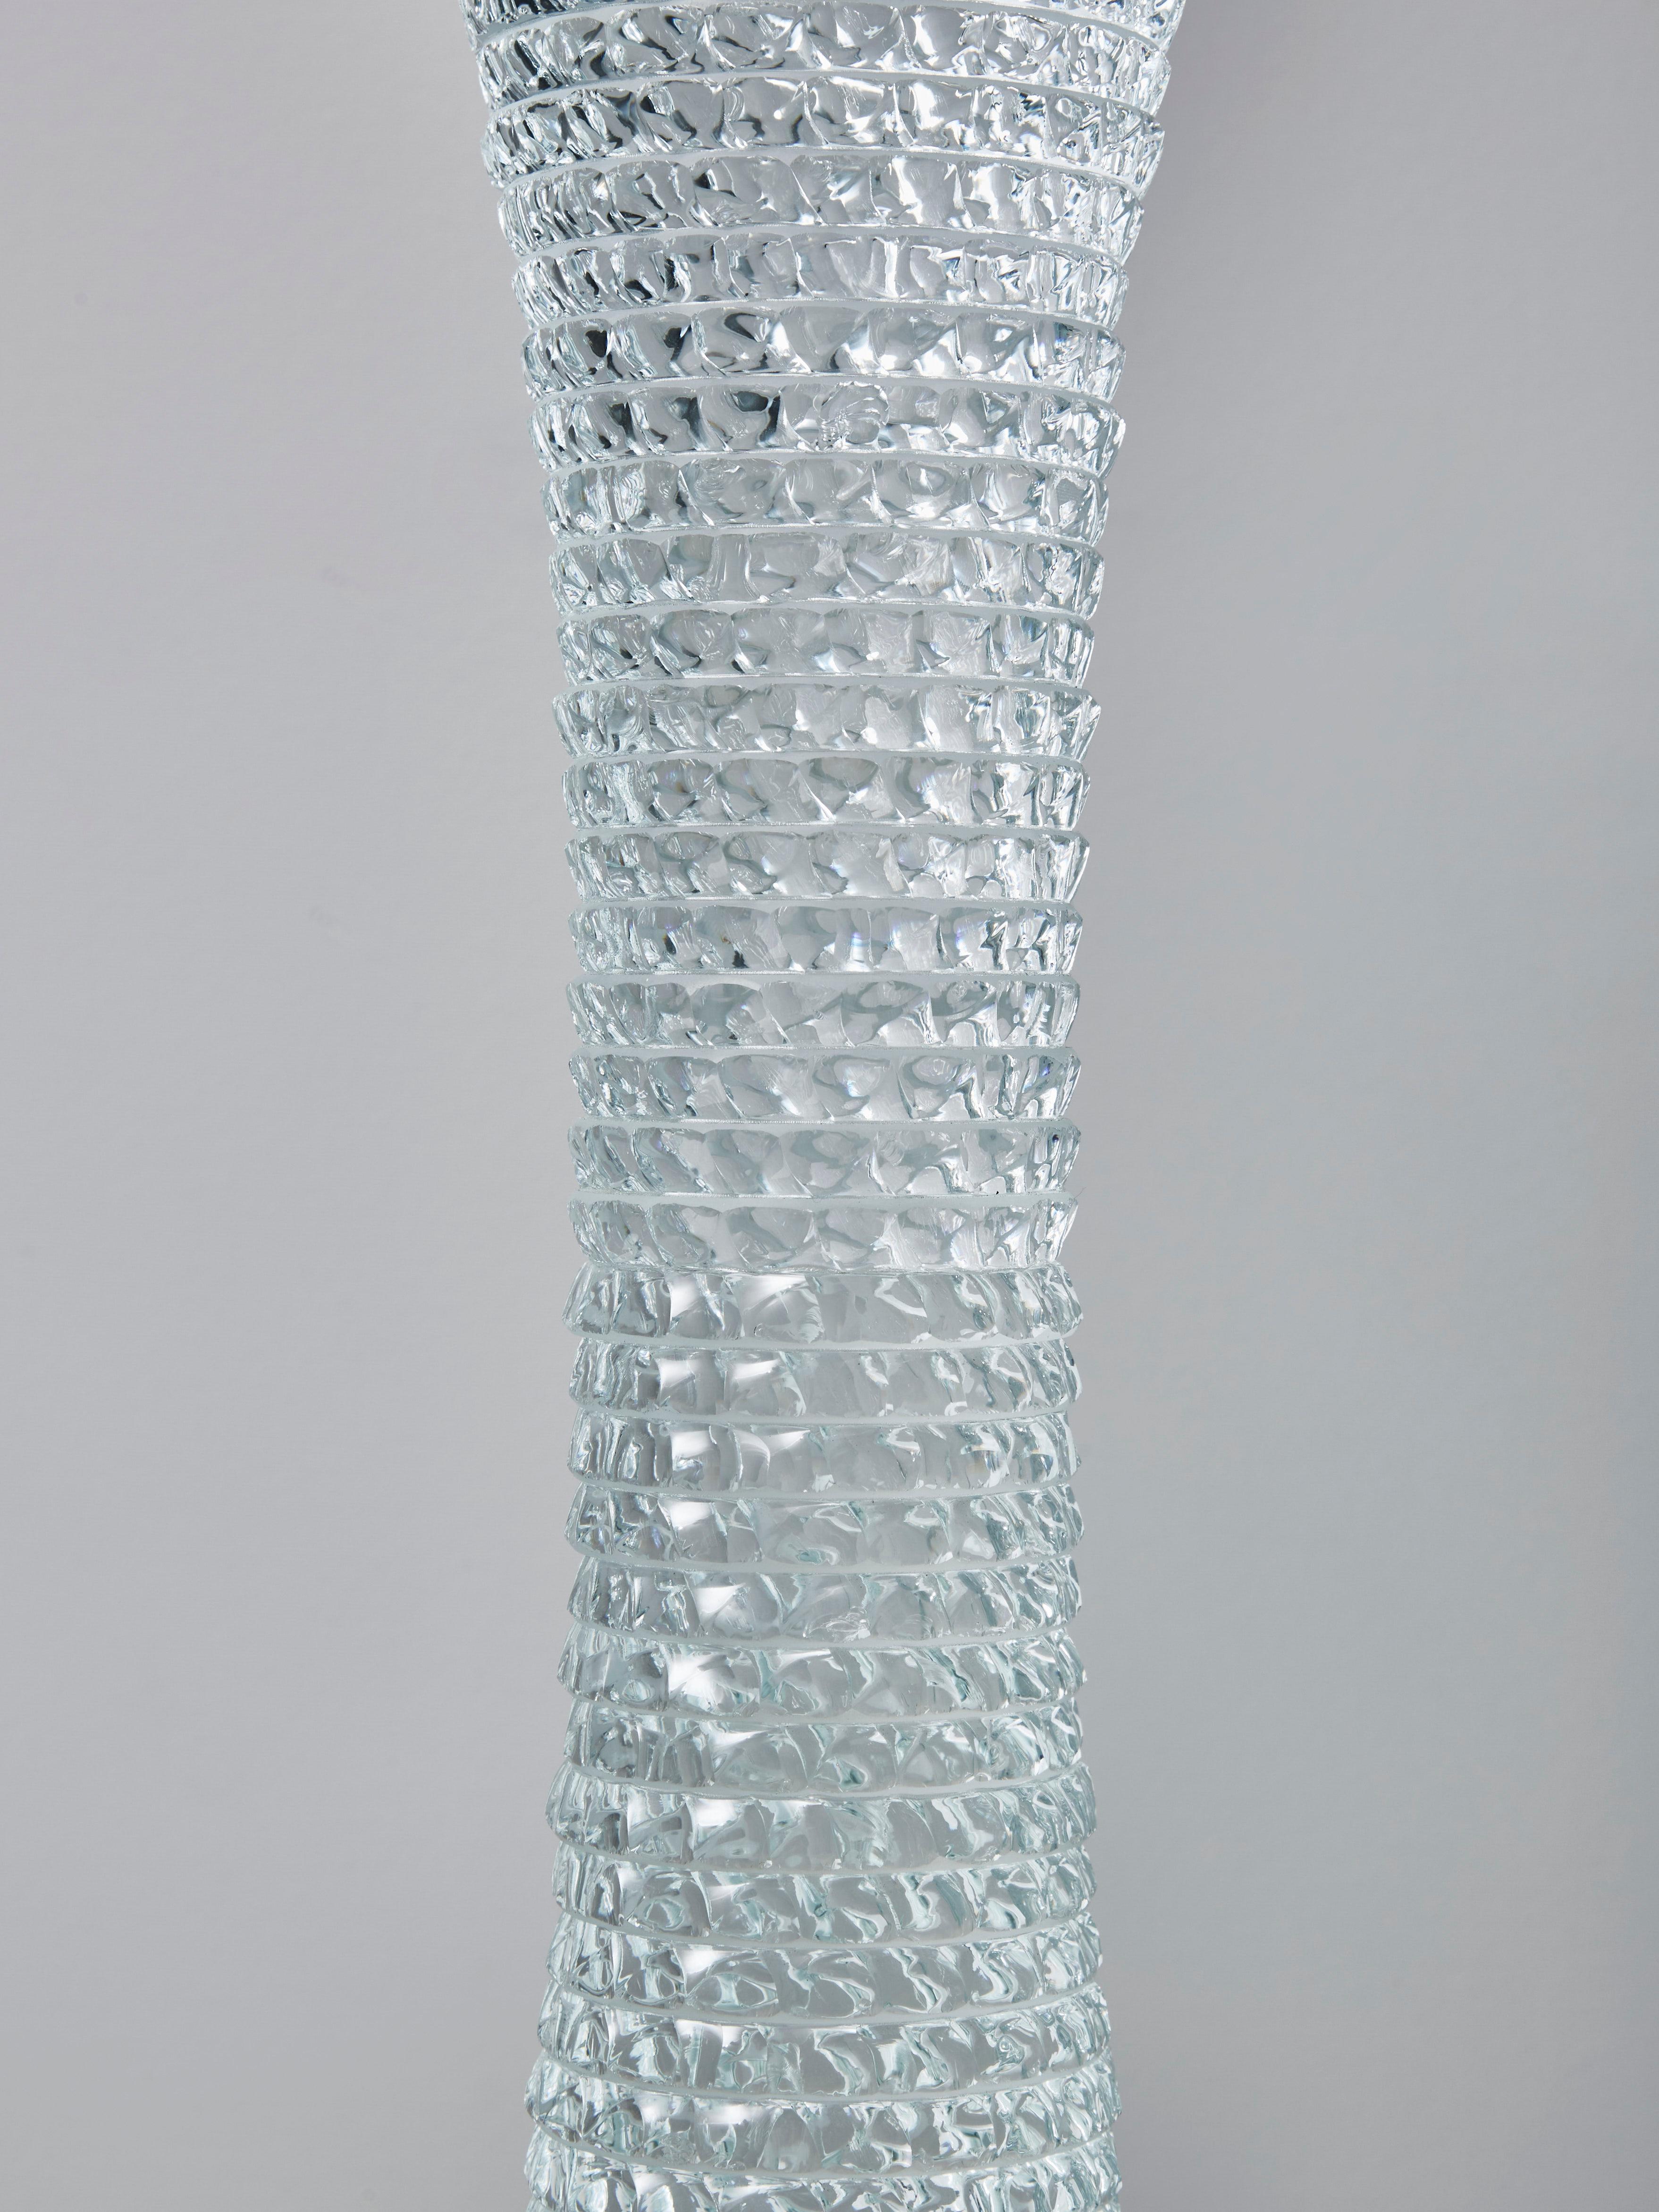 Contemporary Glass lamp At Cost Price For Sale